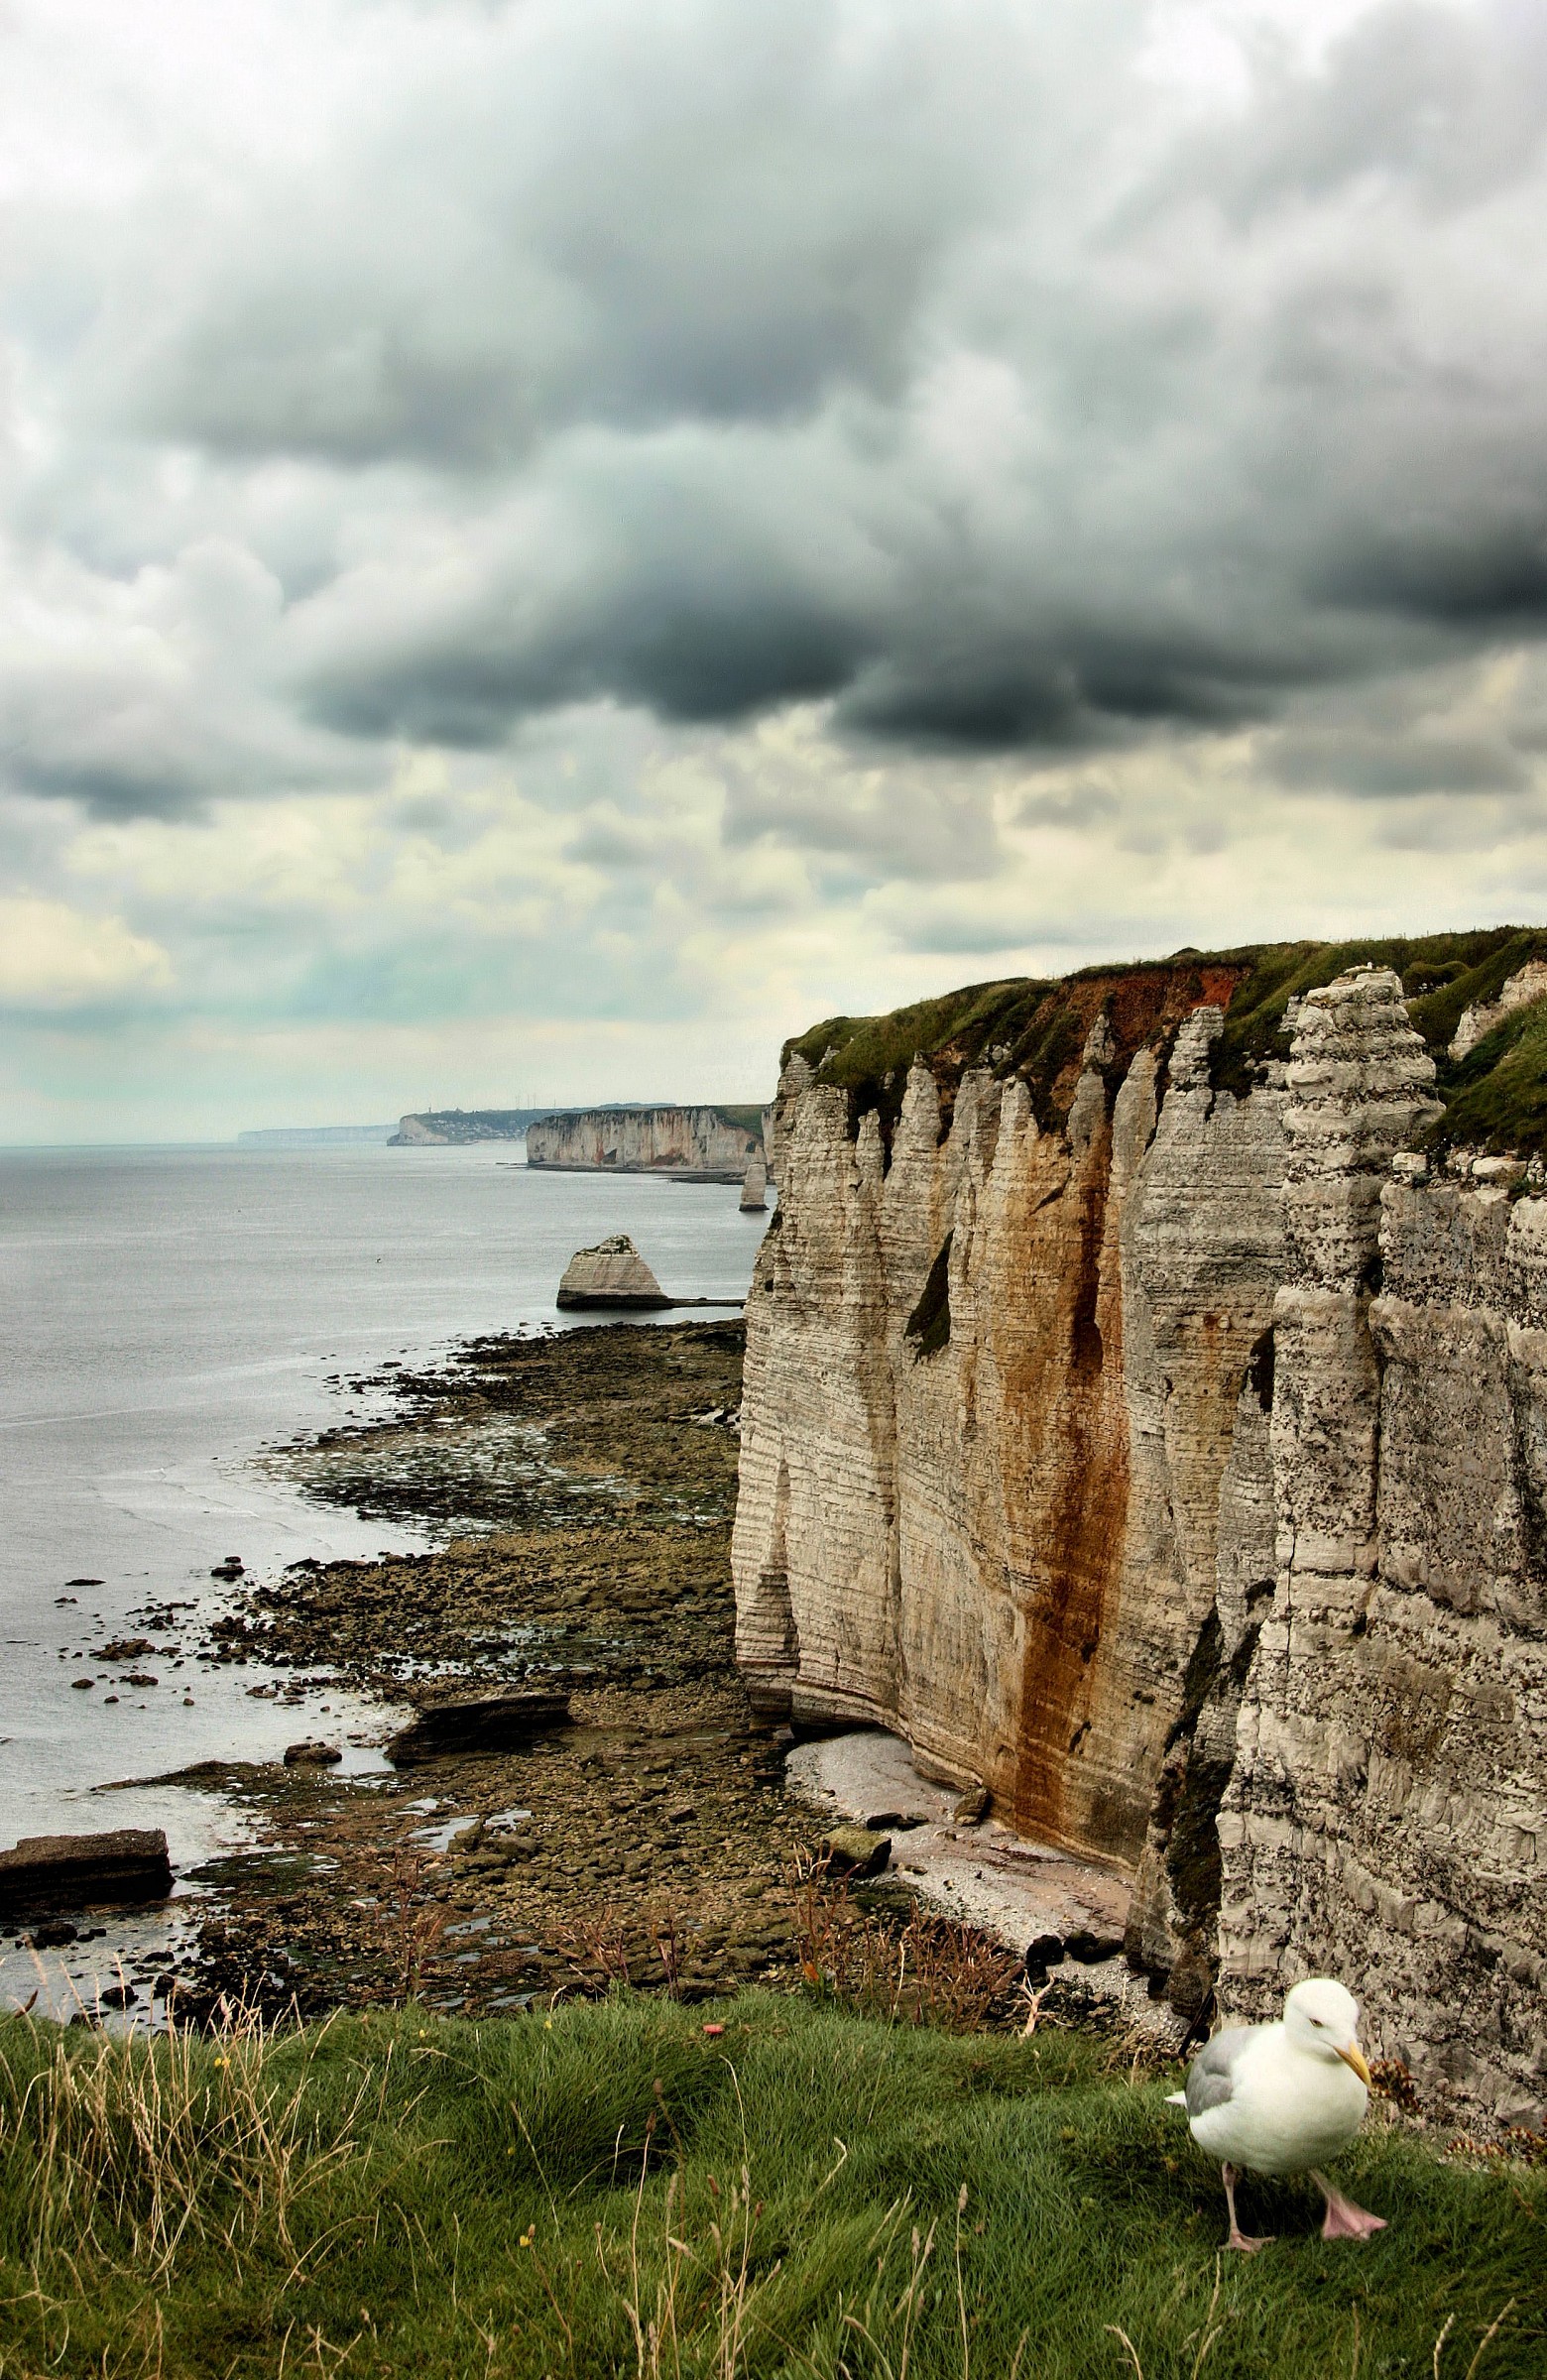 A resident of the cliffs of Etretat...